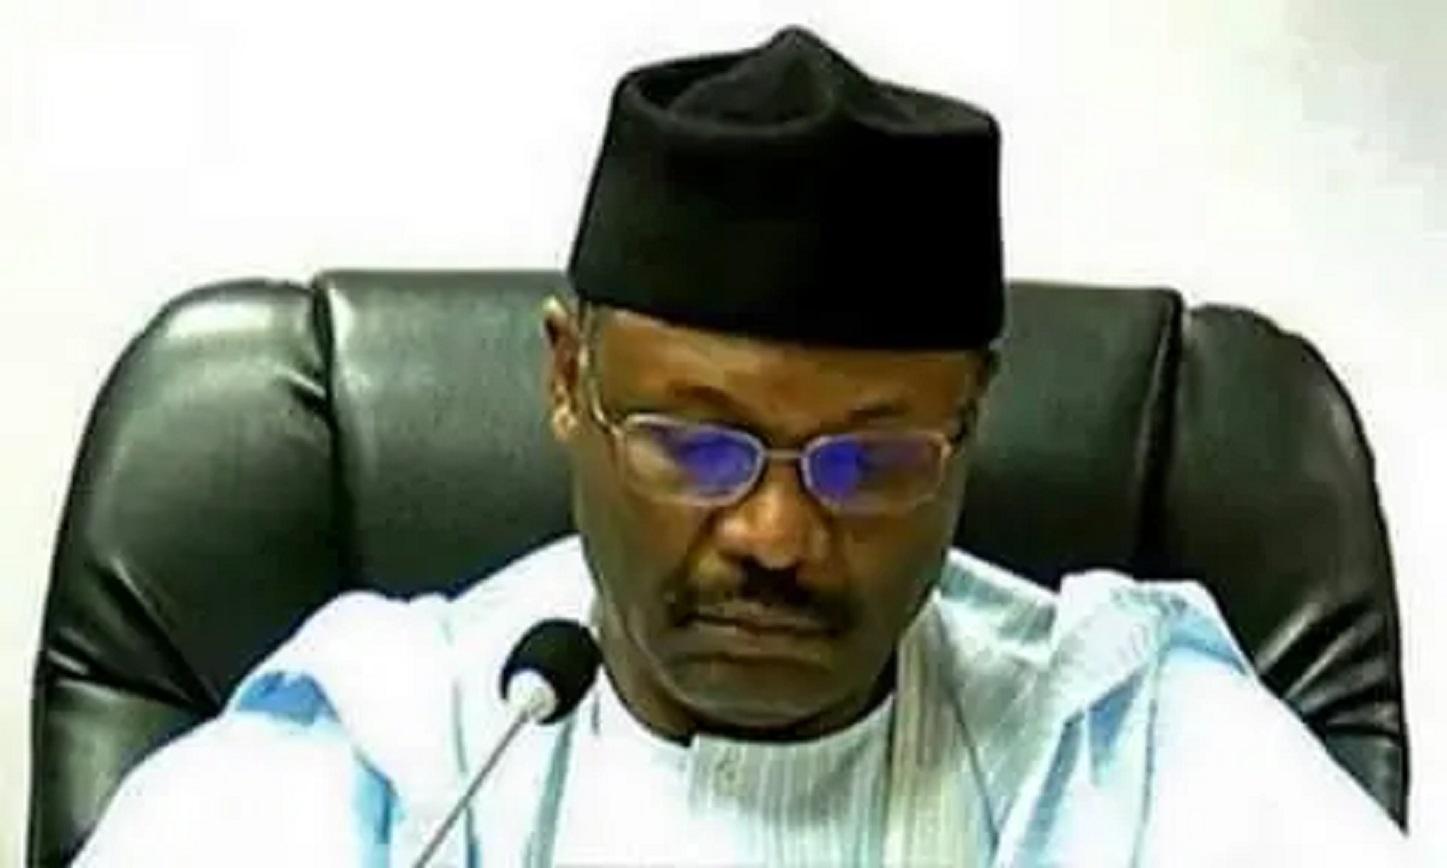 ‘Why politicians are after INEC chairman’